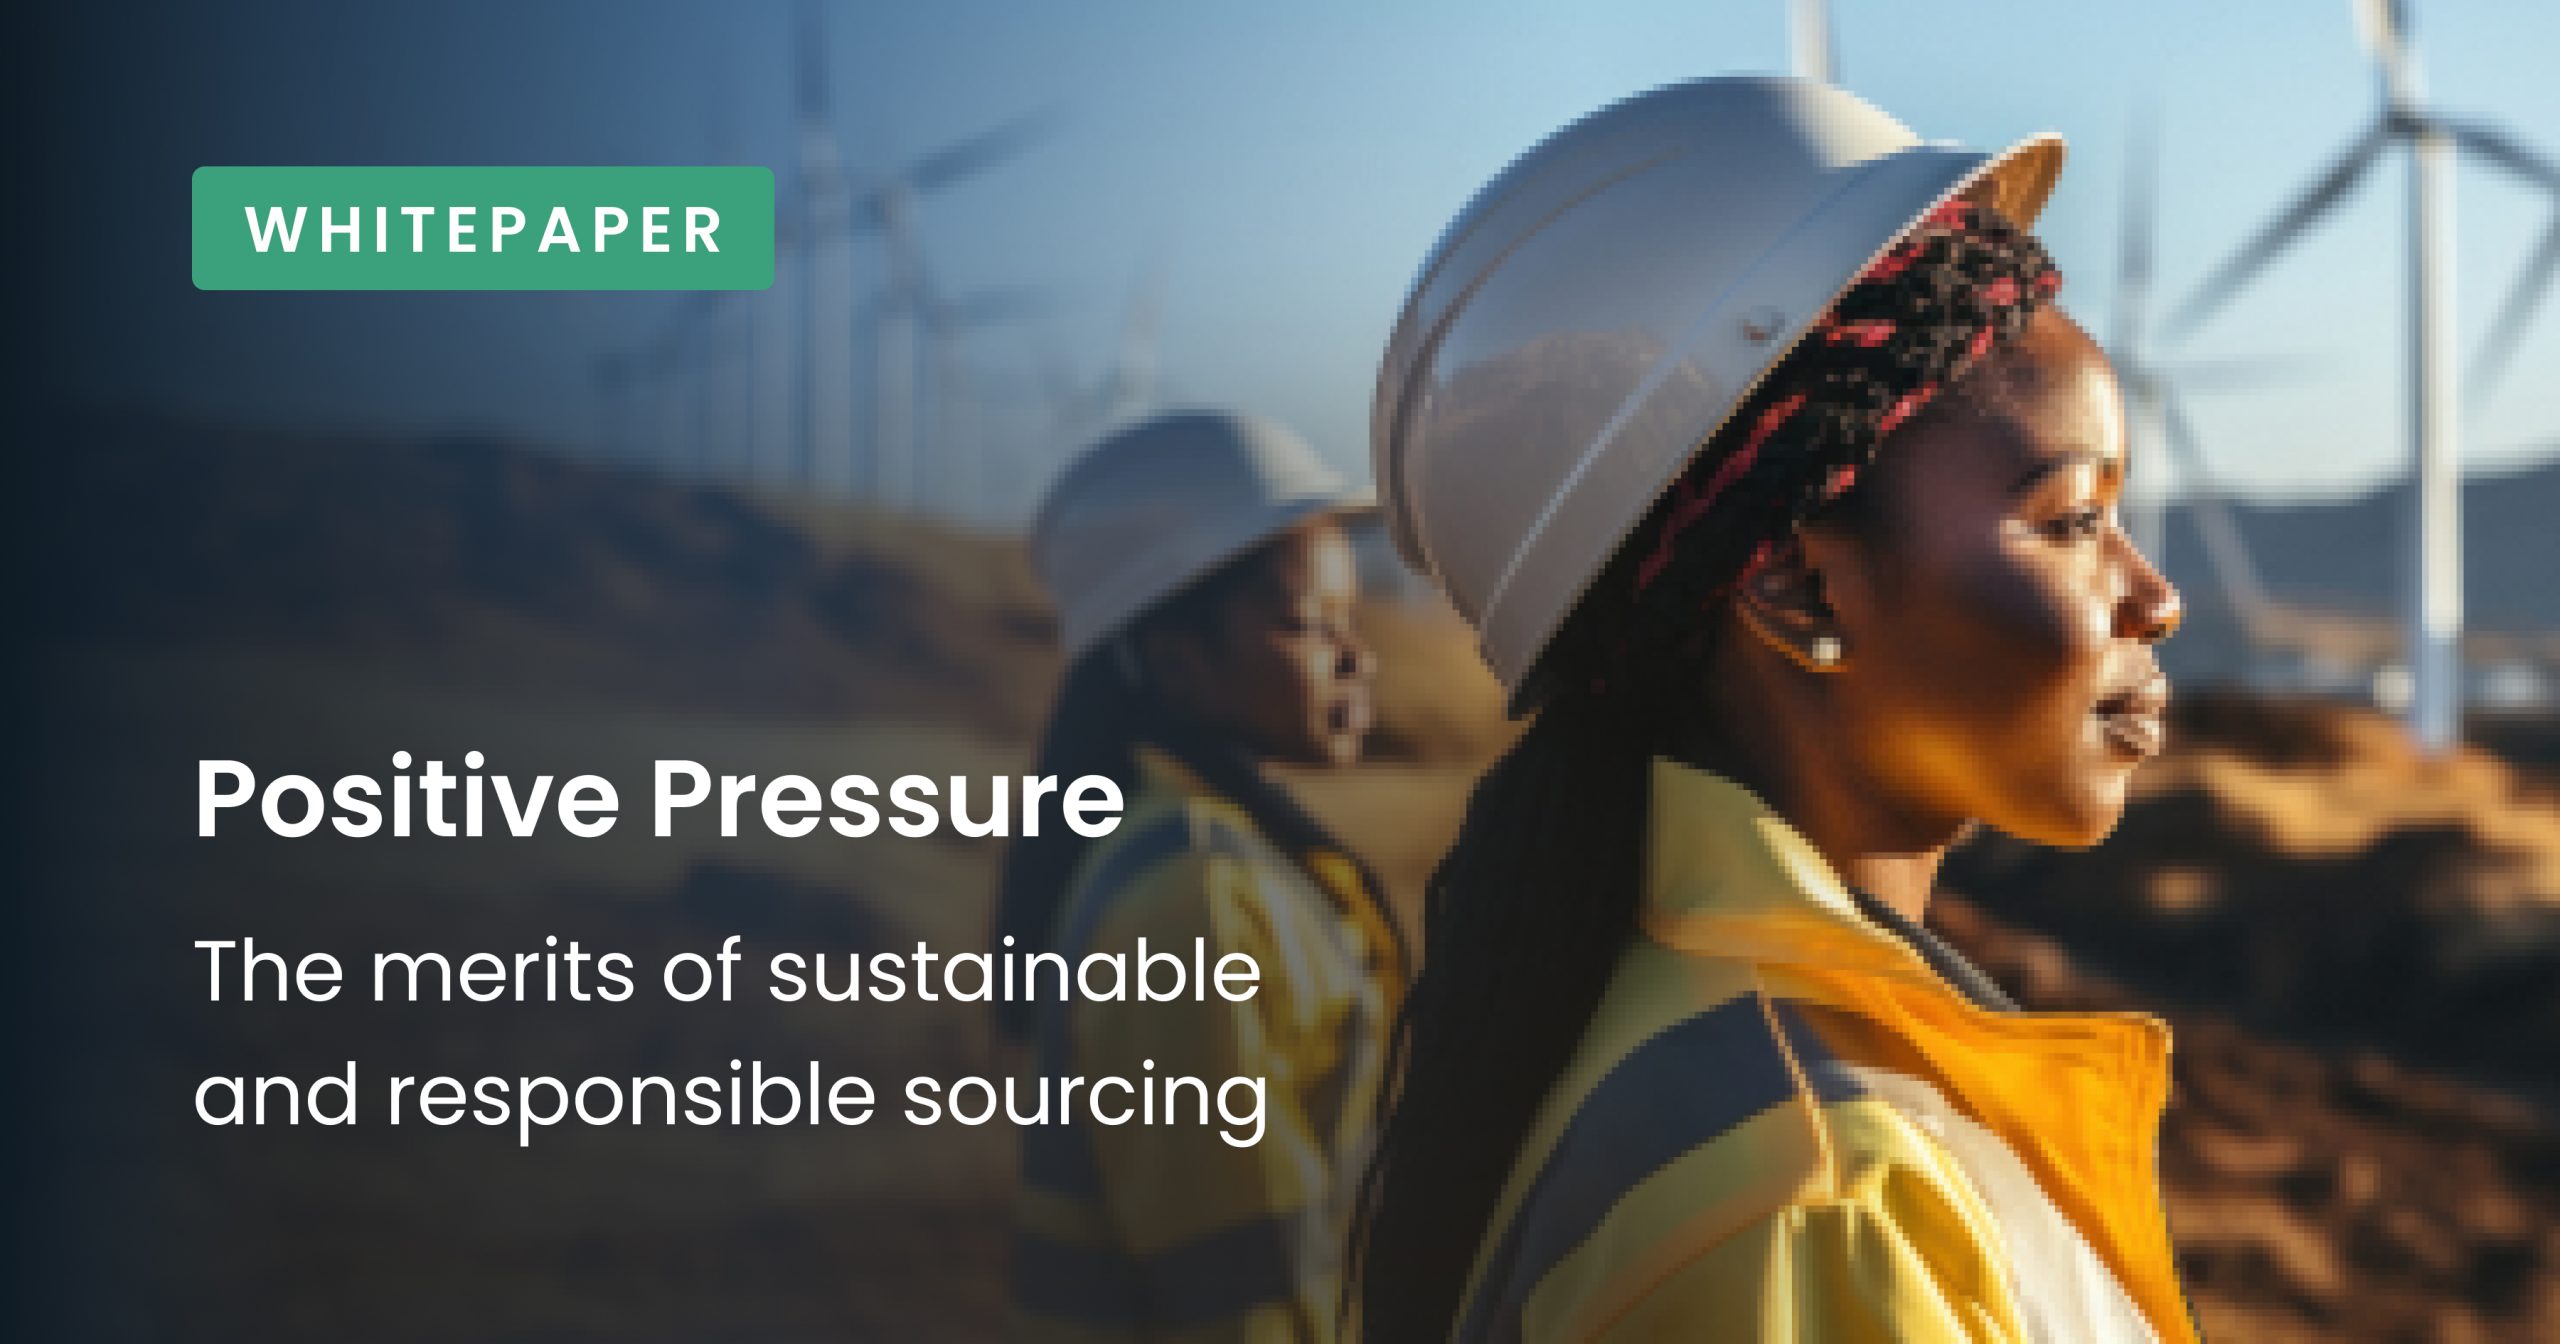 Positive Pressure: The merits of sustainable and responsible sourcing